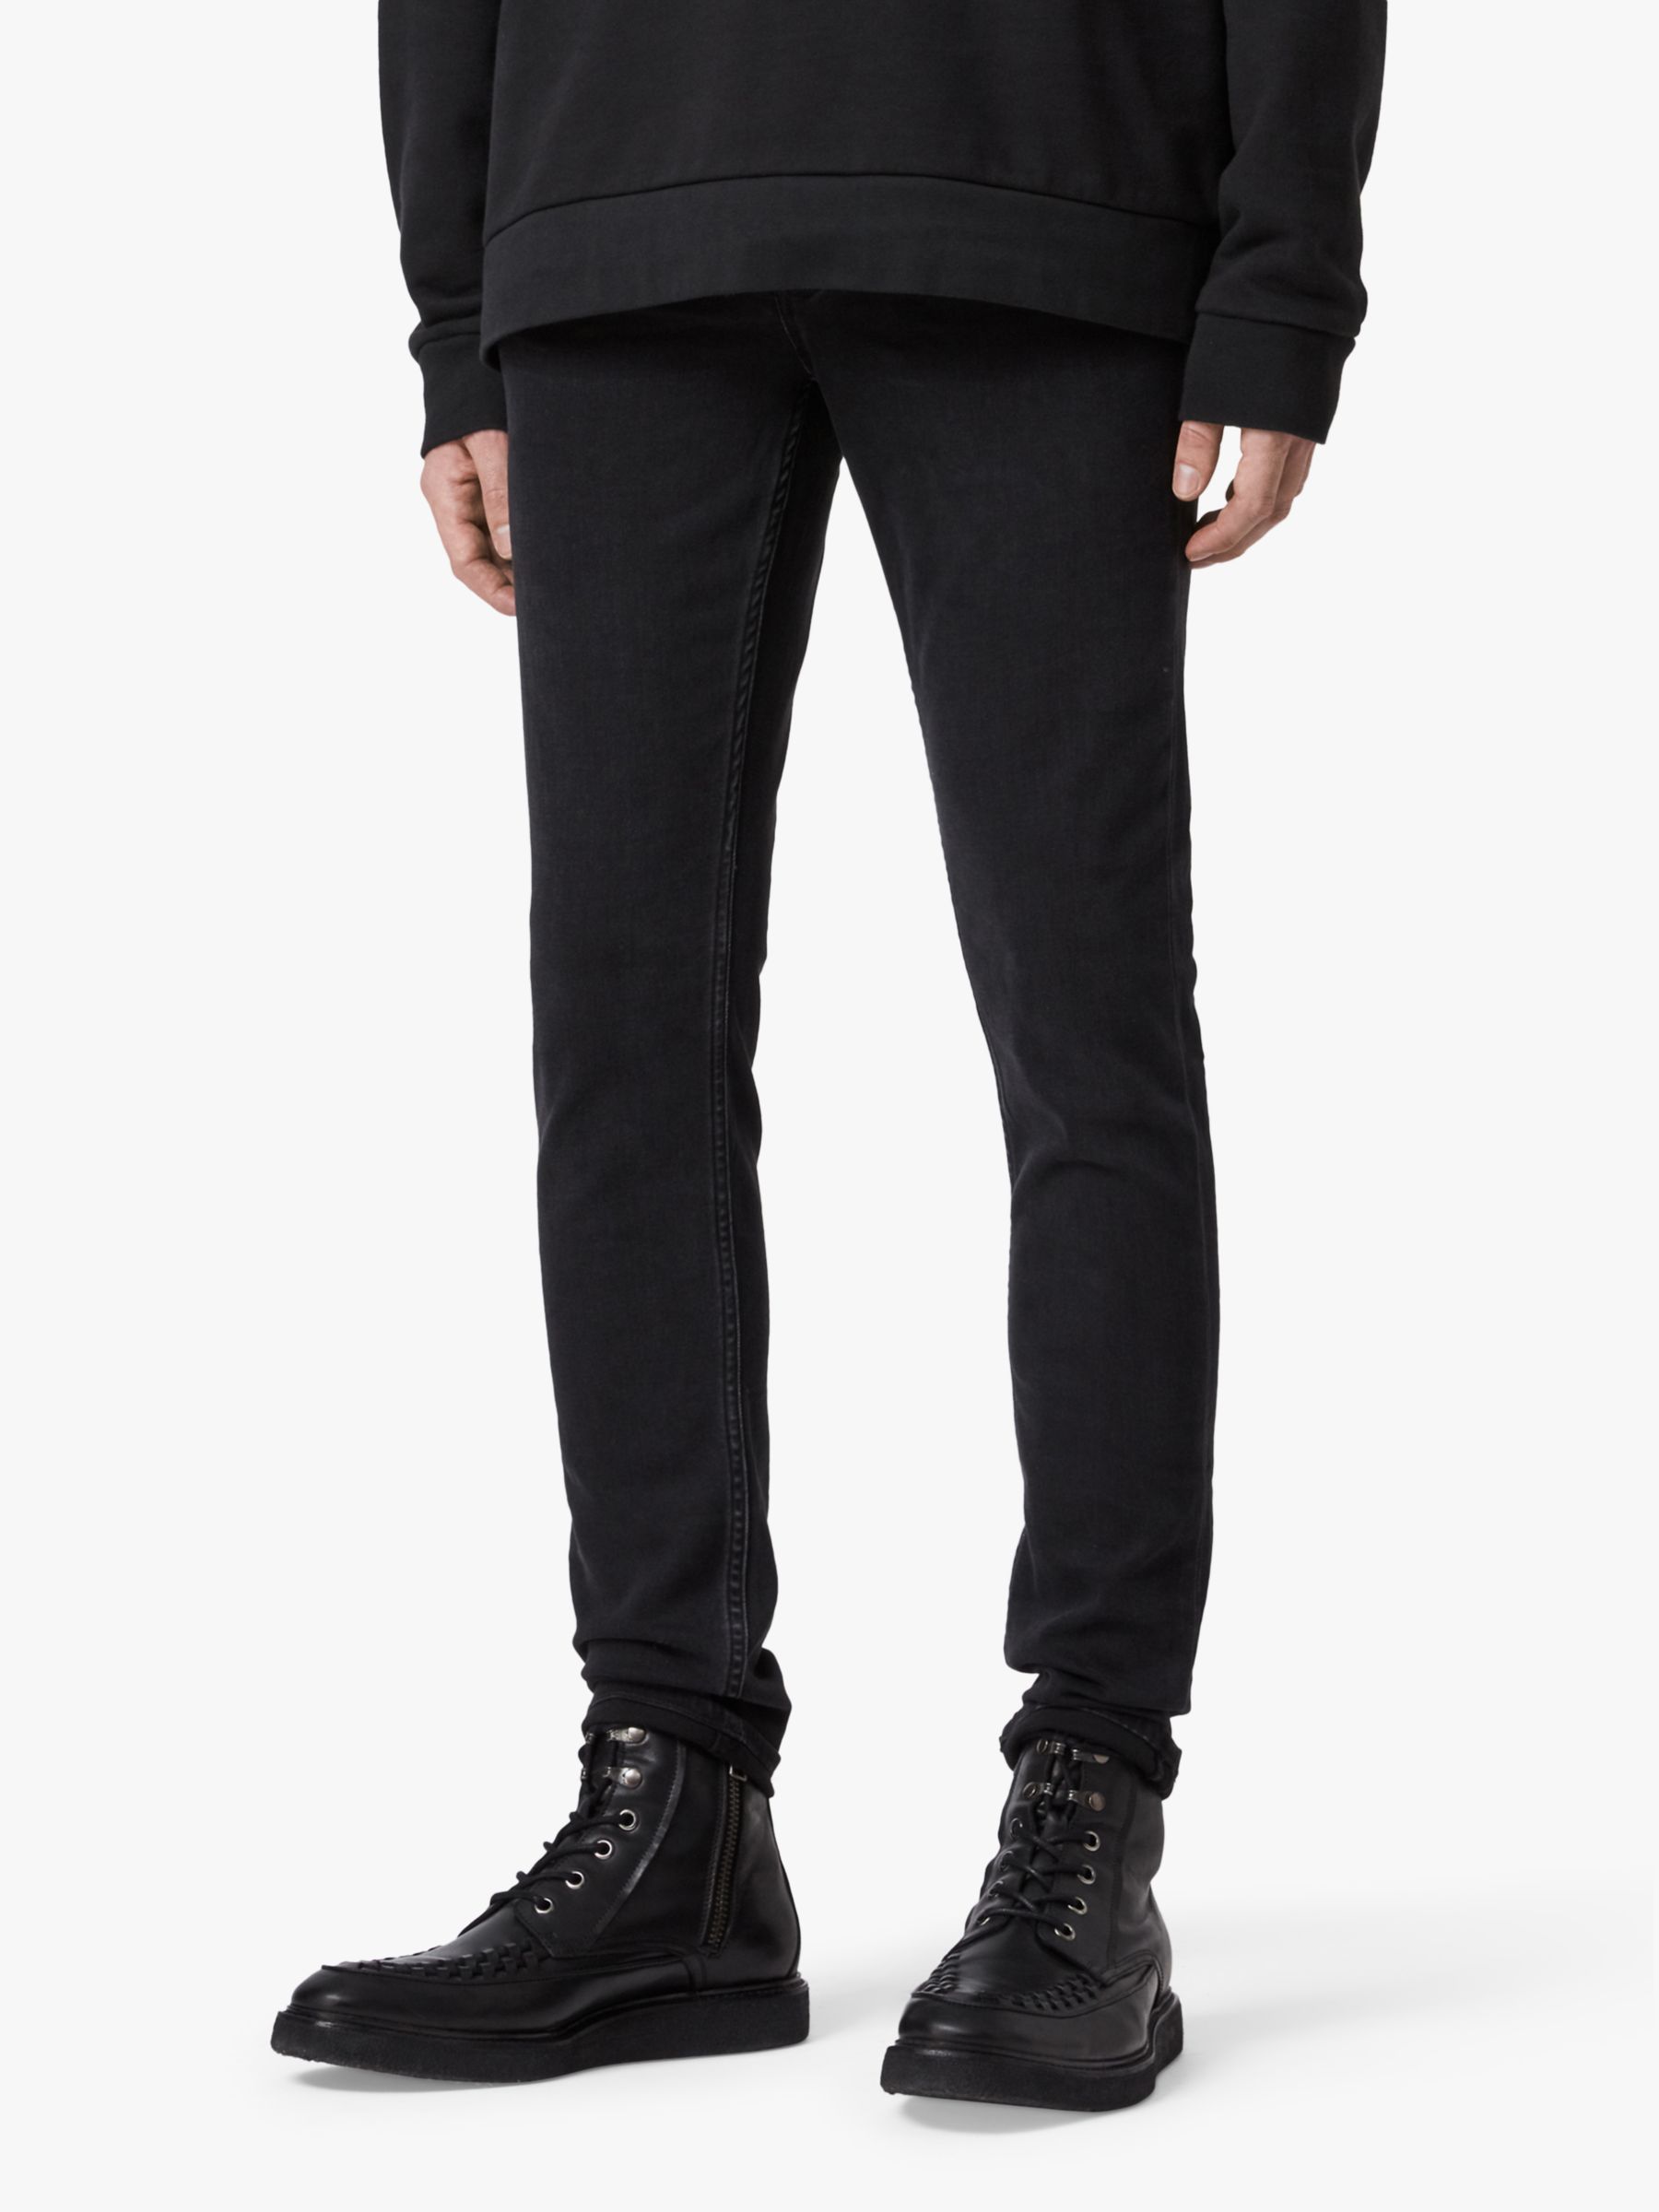 AllSaints Ronnie Skinny Jeans, Washed Black at John Lewis & Partners